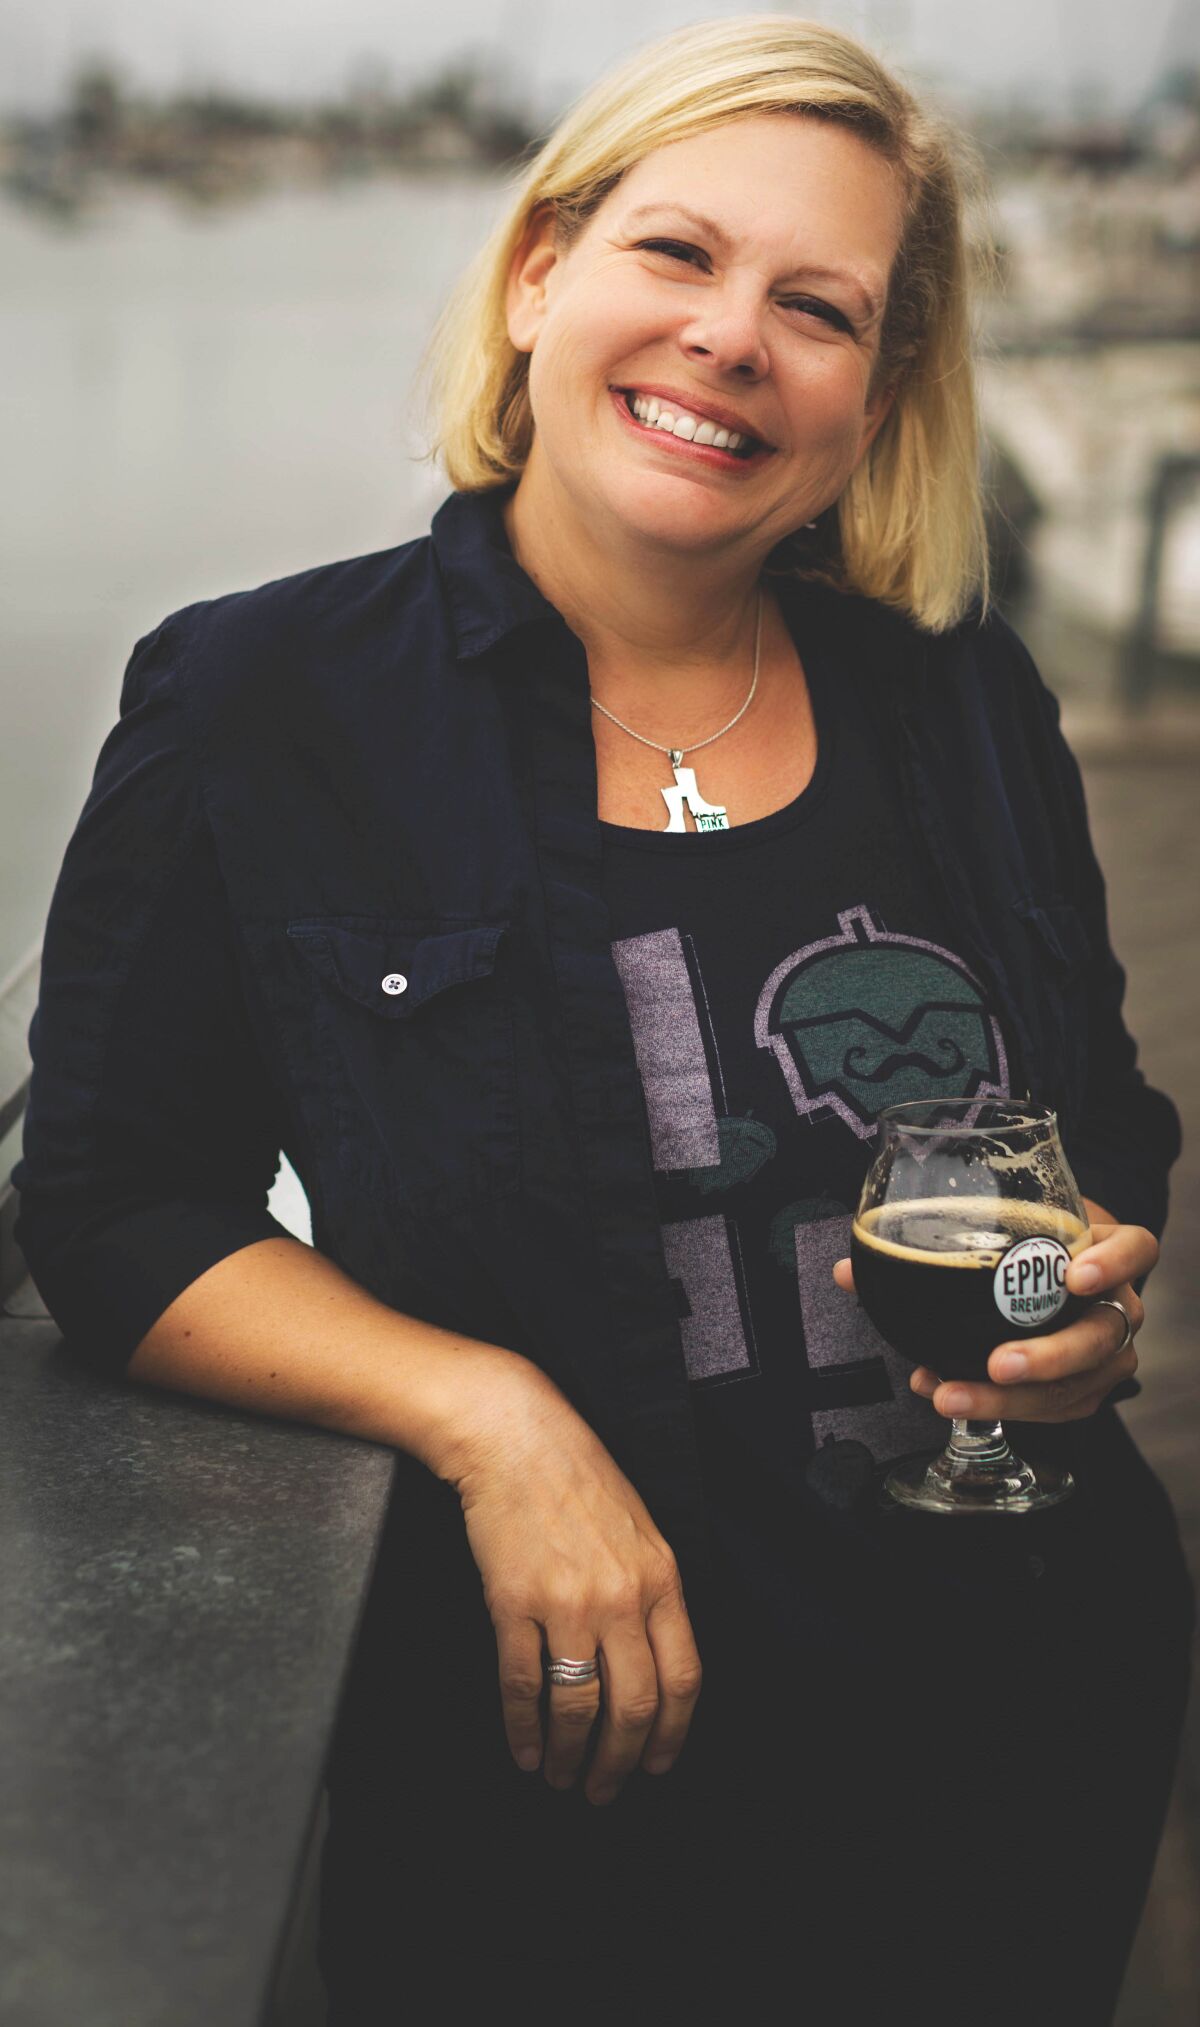 San Diego-based lawyer Candace L. Moon received the ‘Industry People of the Year’ honor from The Craft Beer Marketing Awards.